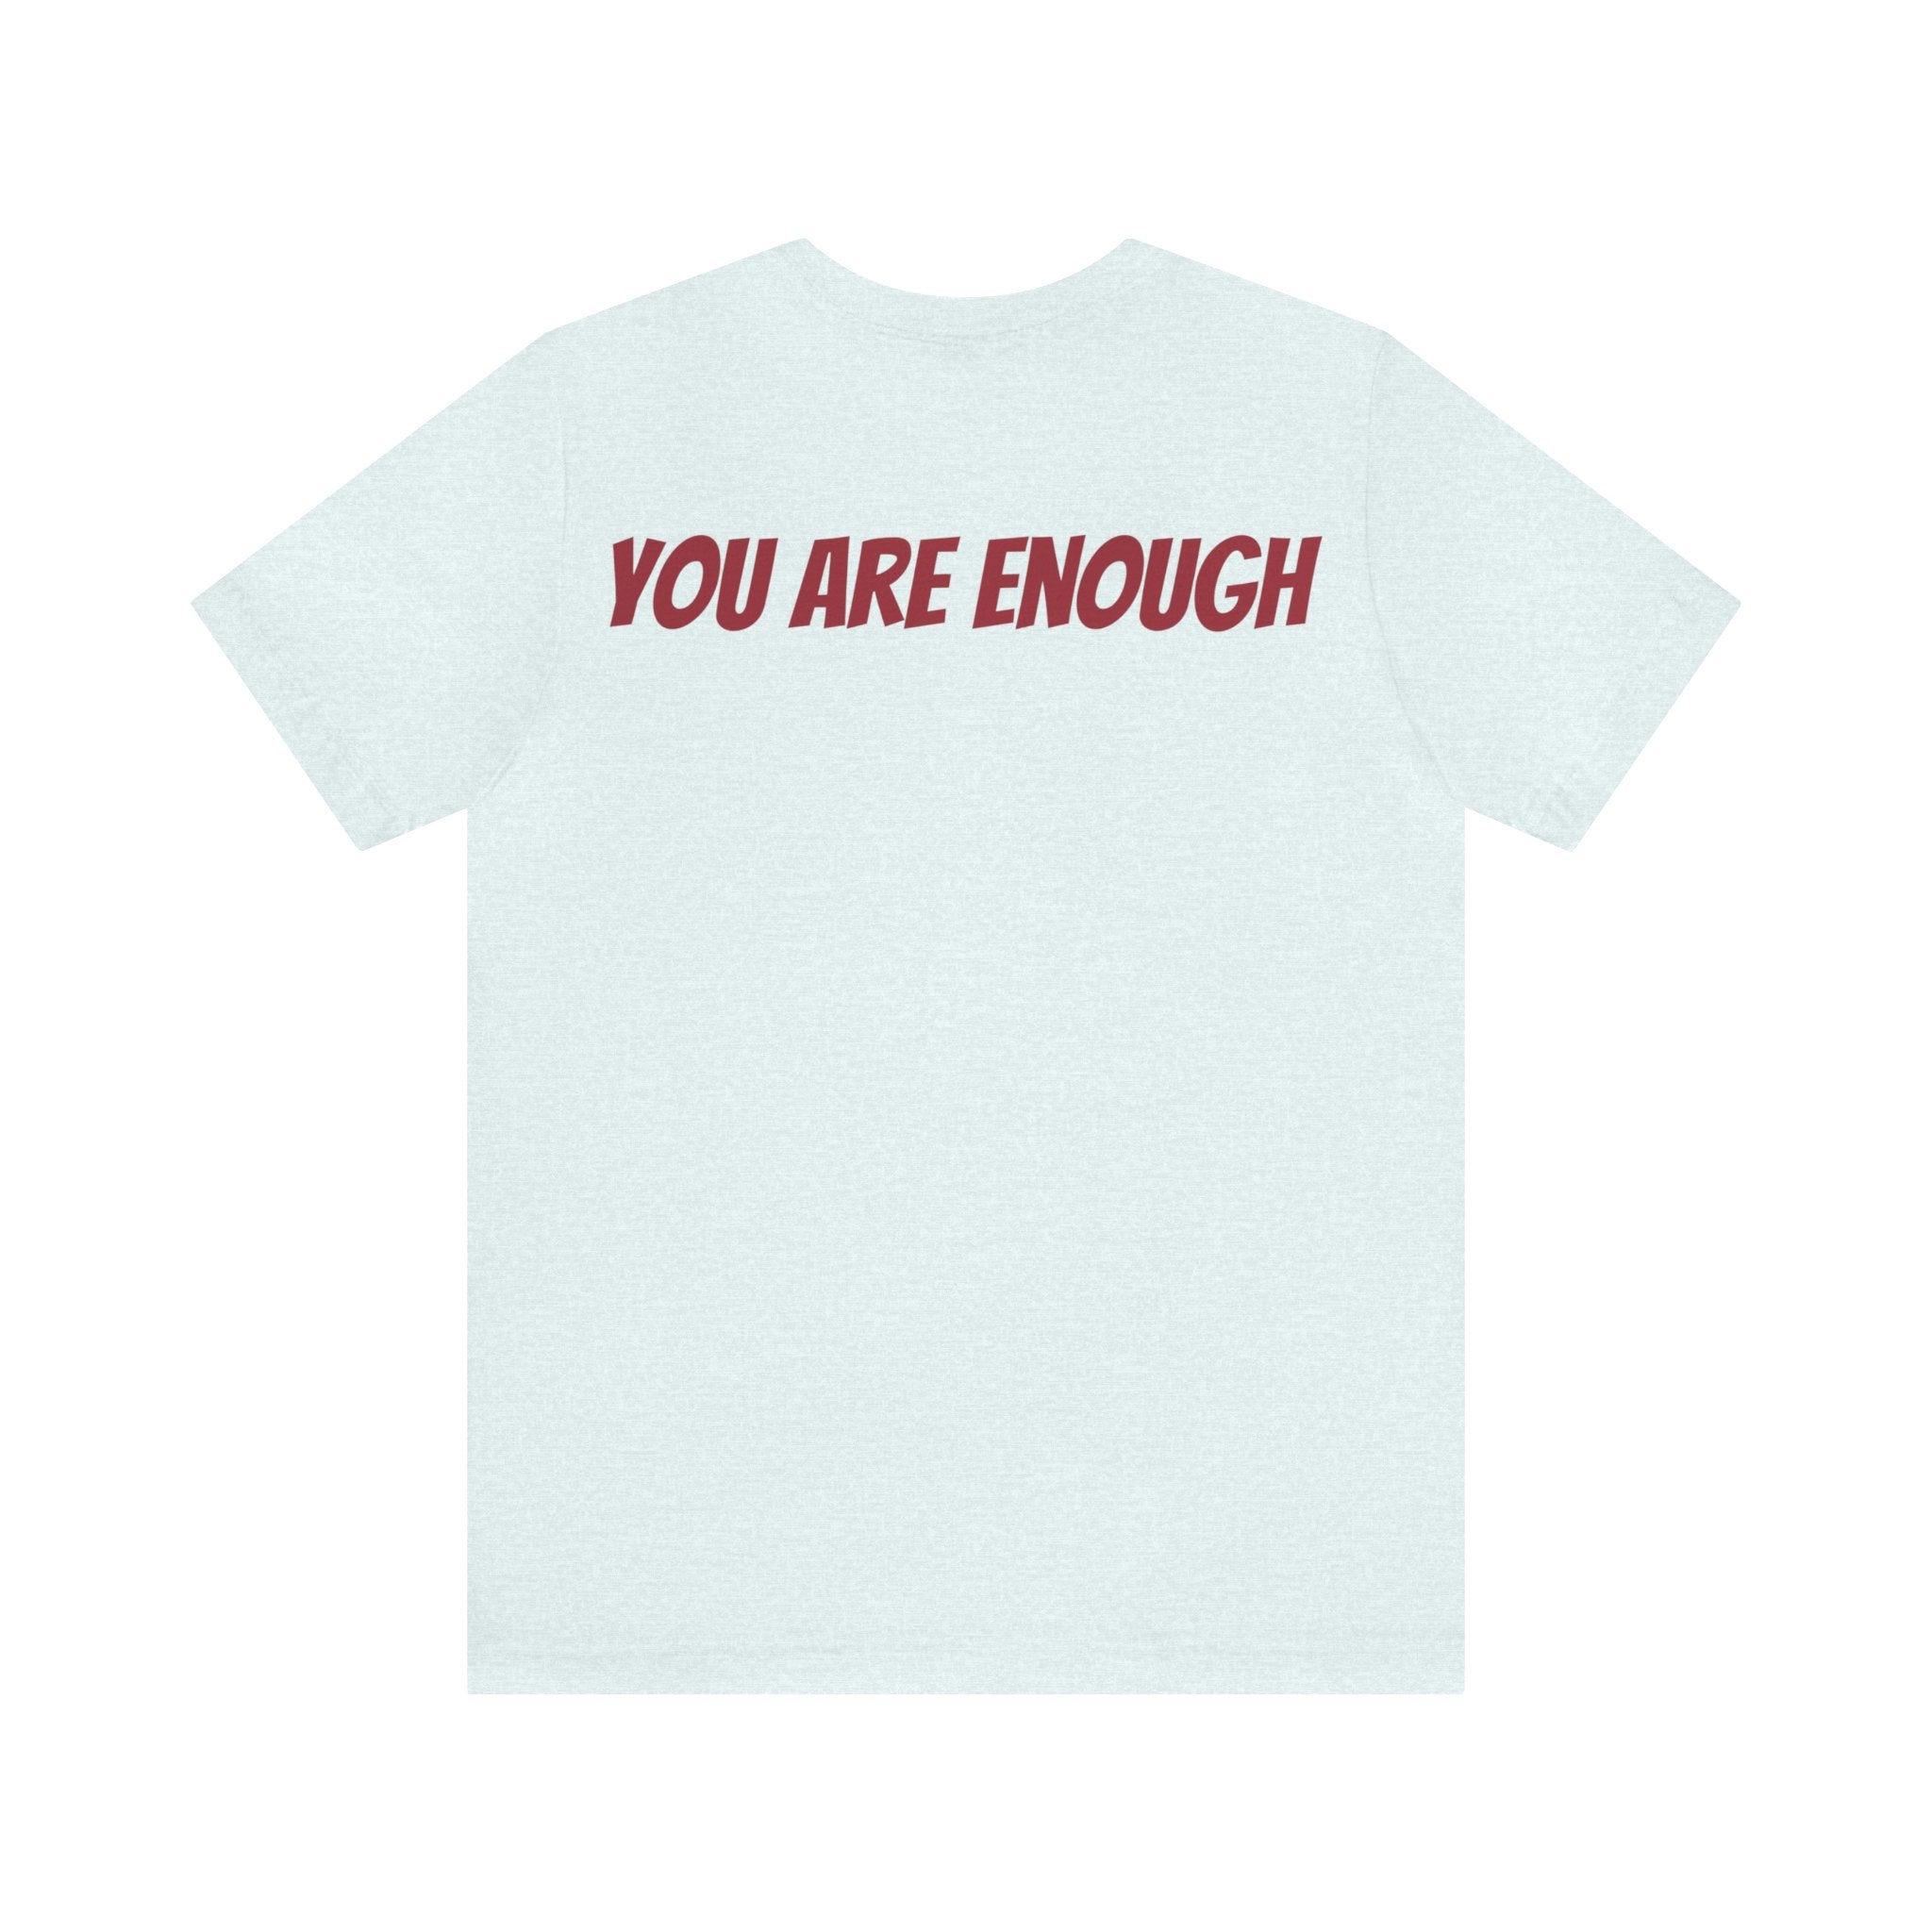 You Are Enough Short Sleeve Tee Bella+Canvas 3001 Heather Mauve Airlume Cotton Bella+Canvas 3001 Crew Neckline Jersey Short Sleeve Lightweight Fabric Mental Health Support Retail Fit Tear-away Label Tee Unisex Tee T-Shirt 3617441630864493490_2048 Printify